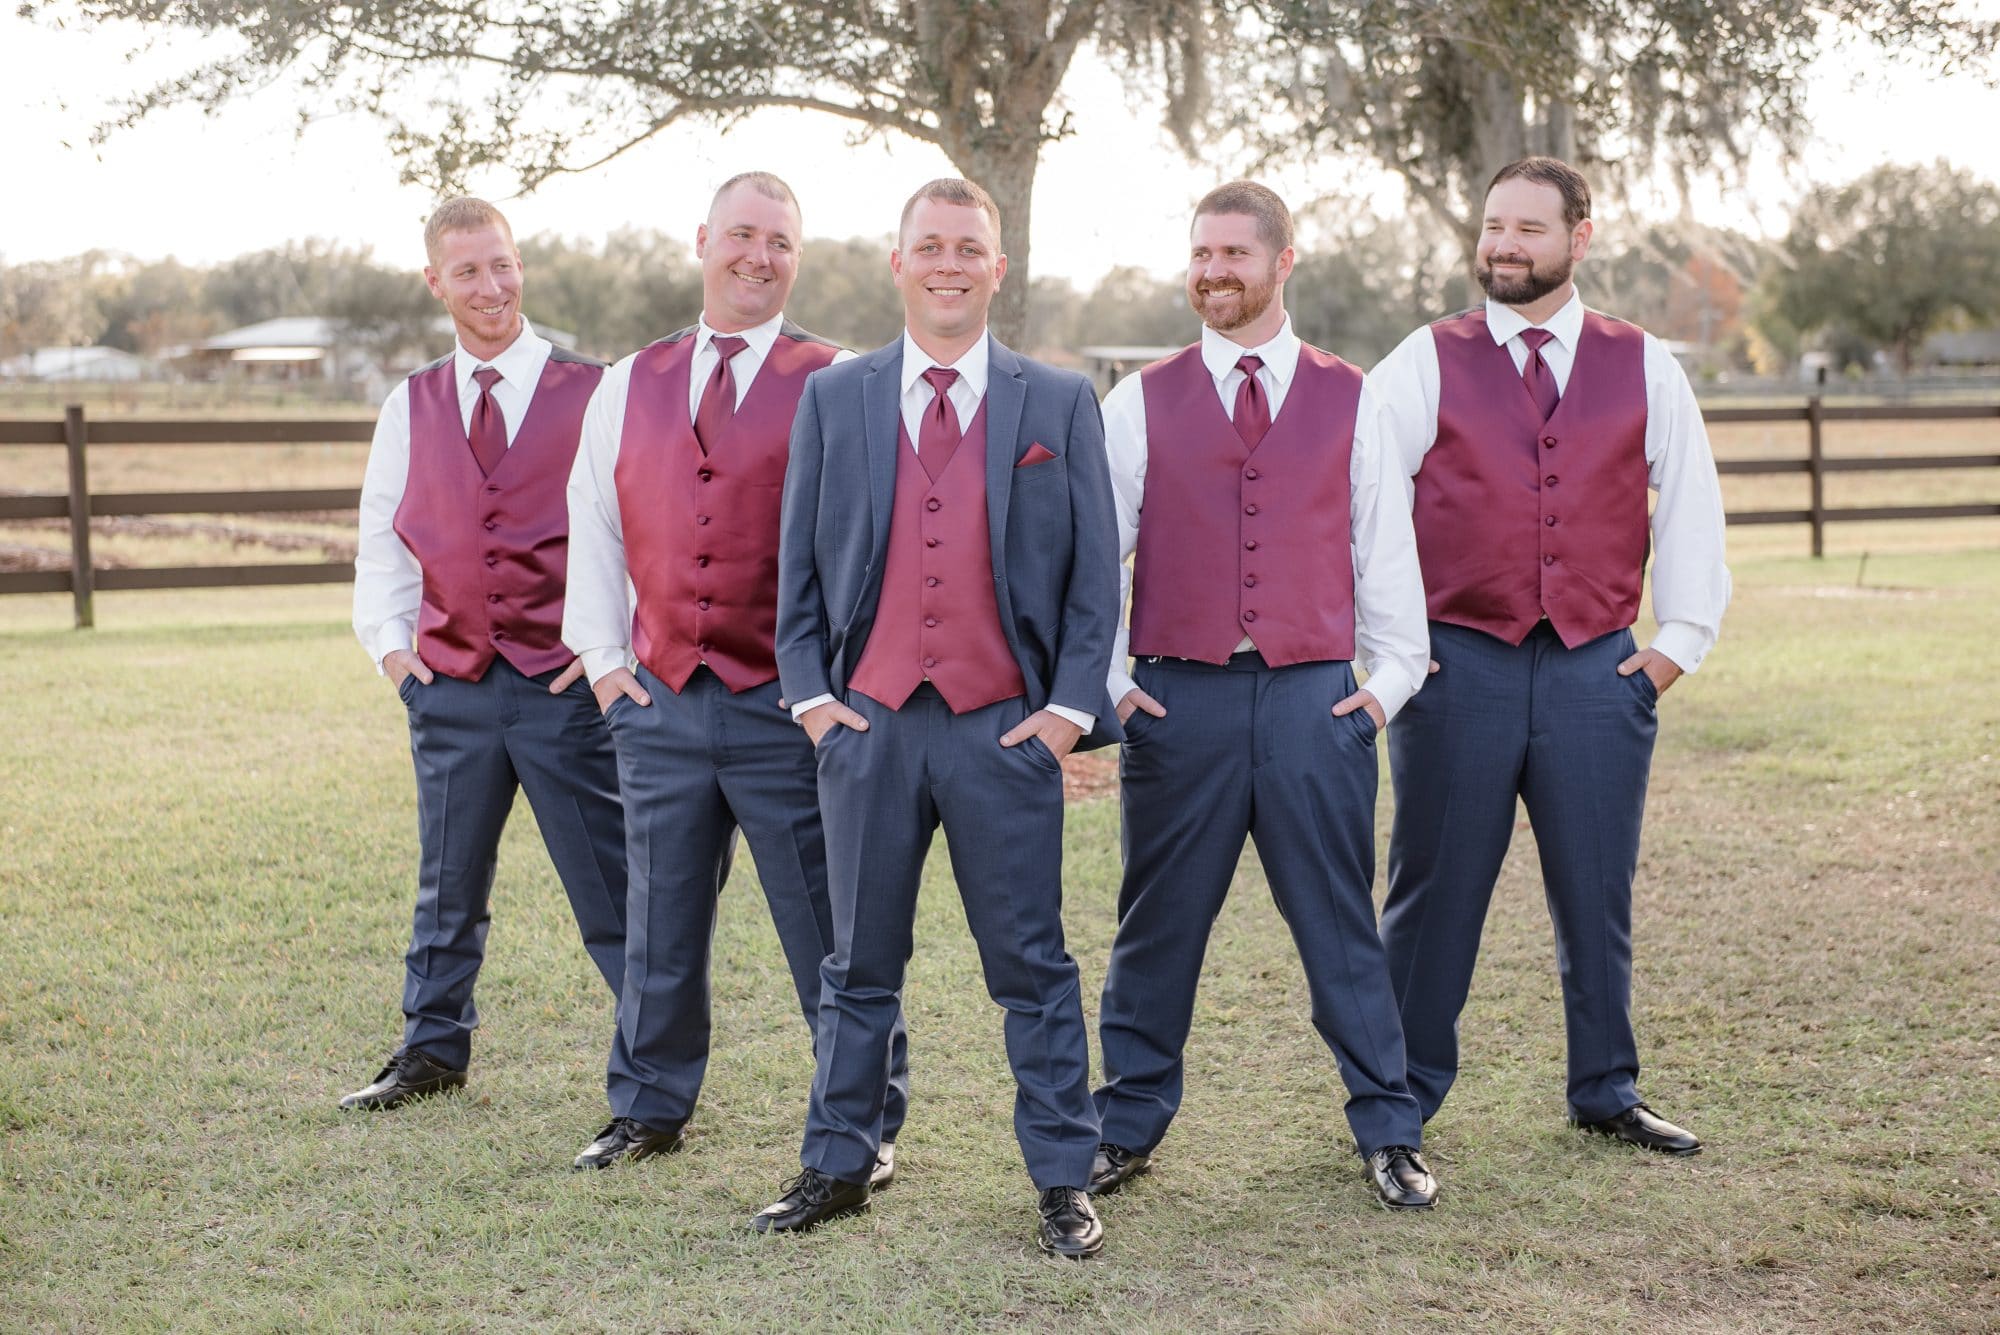 Todd and his groomsmen